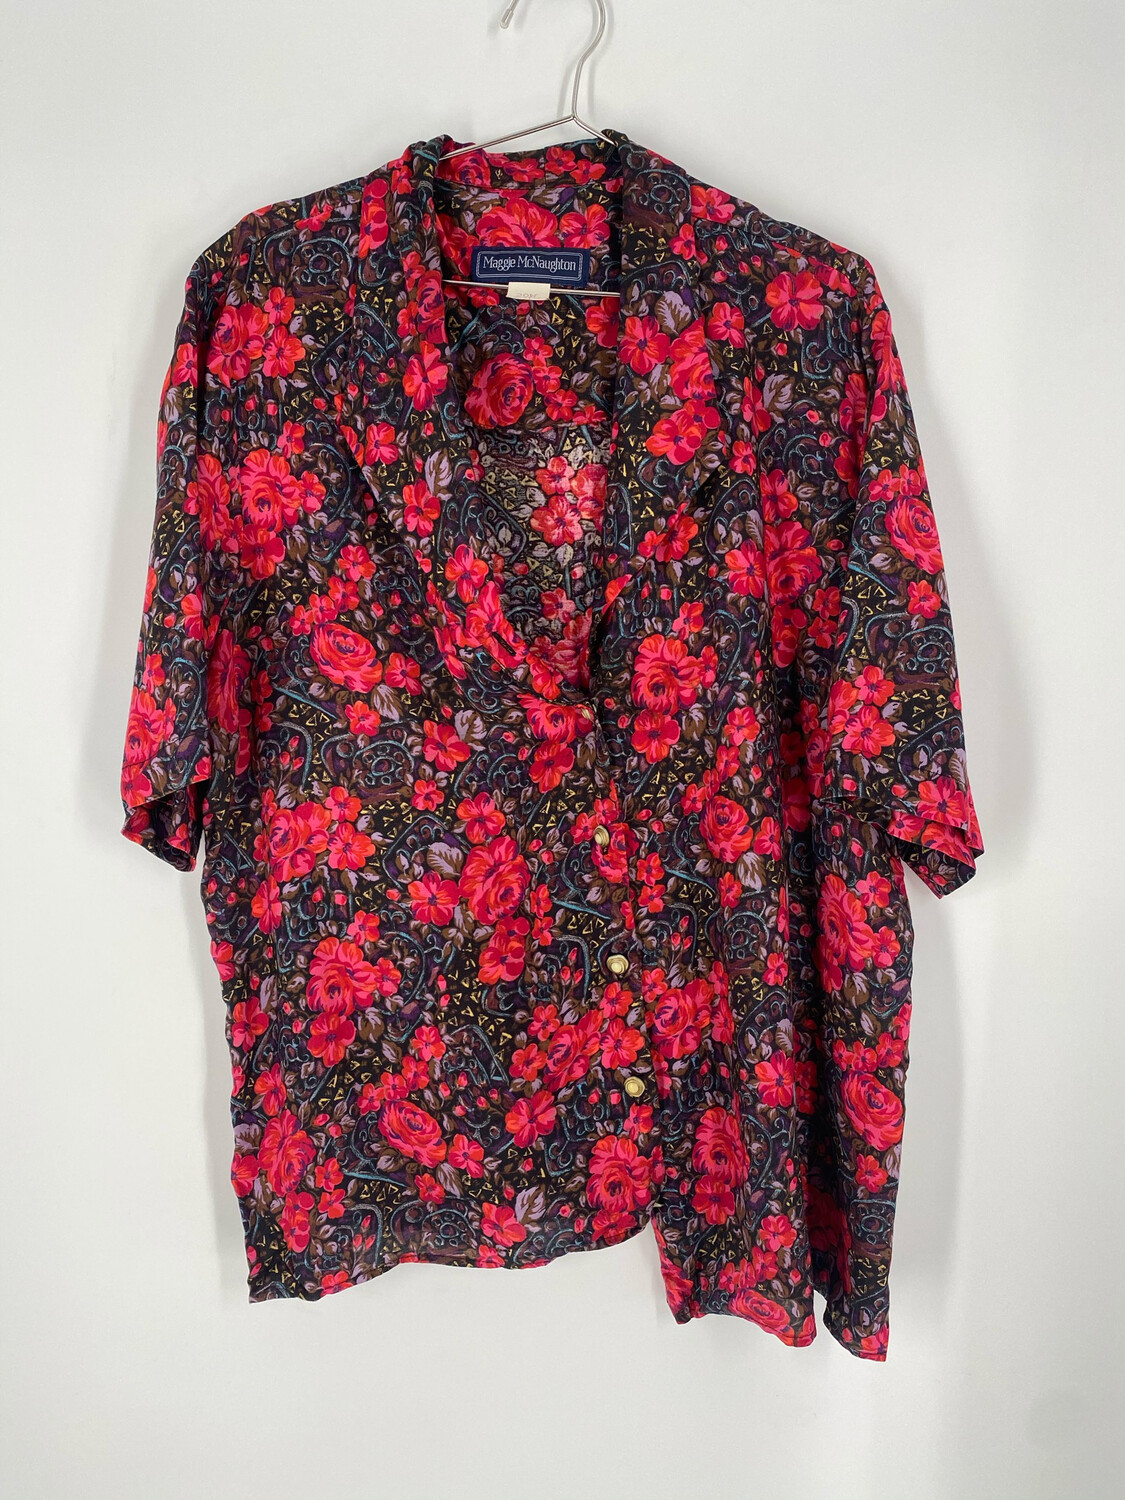 Maggie McNaughton Floral Button Up Top Size 20W